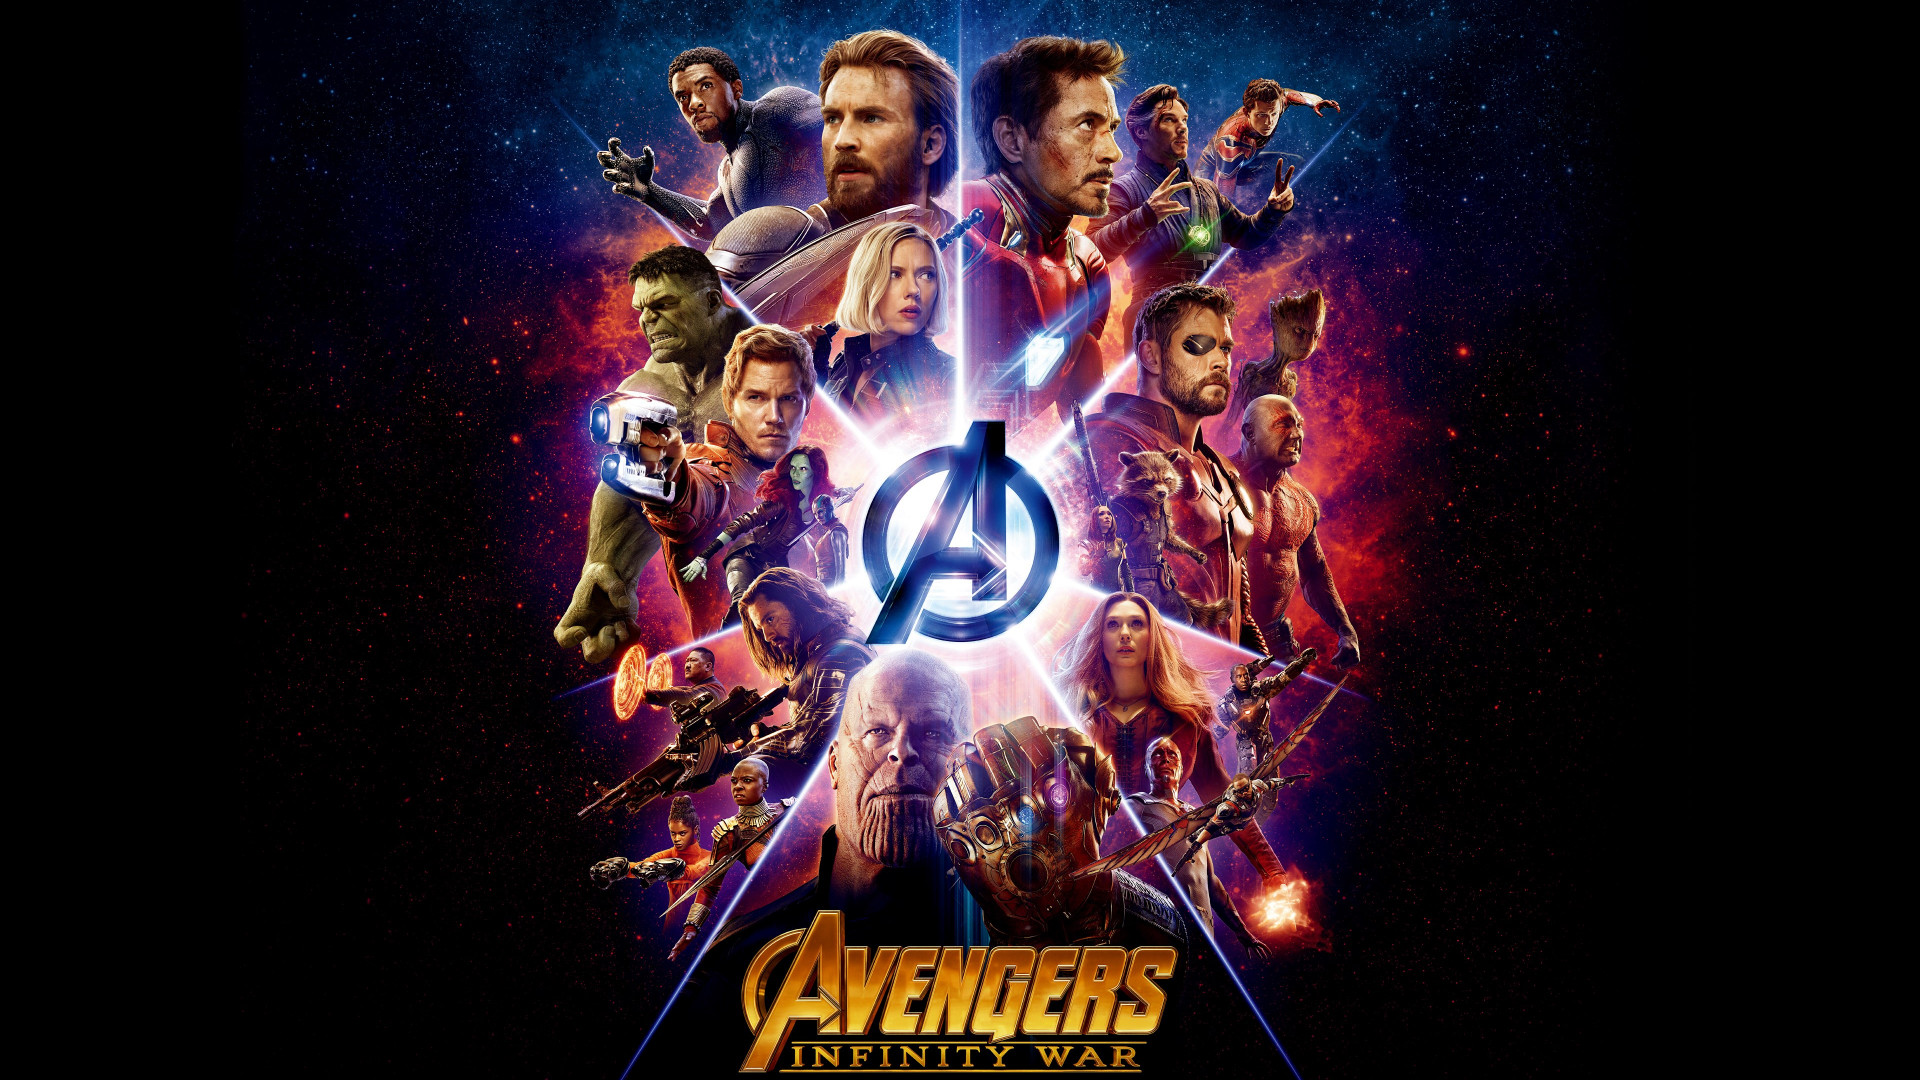 All the heroes from Avengers: Infinity War wallpaper 1920x1080